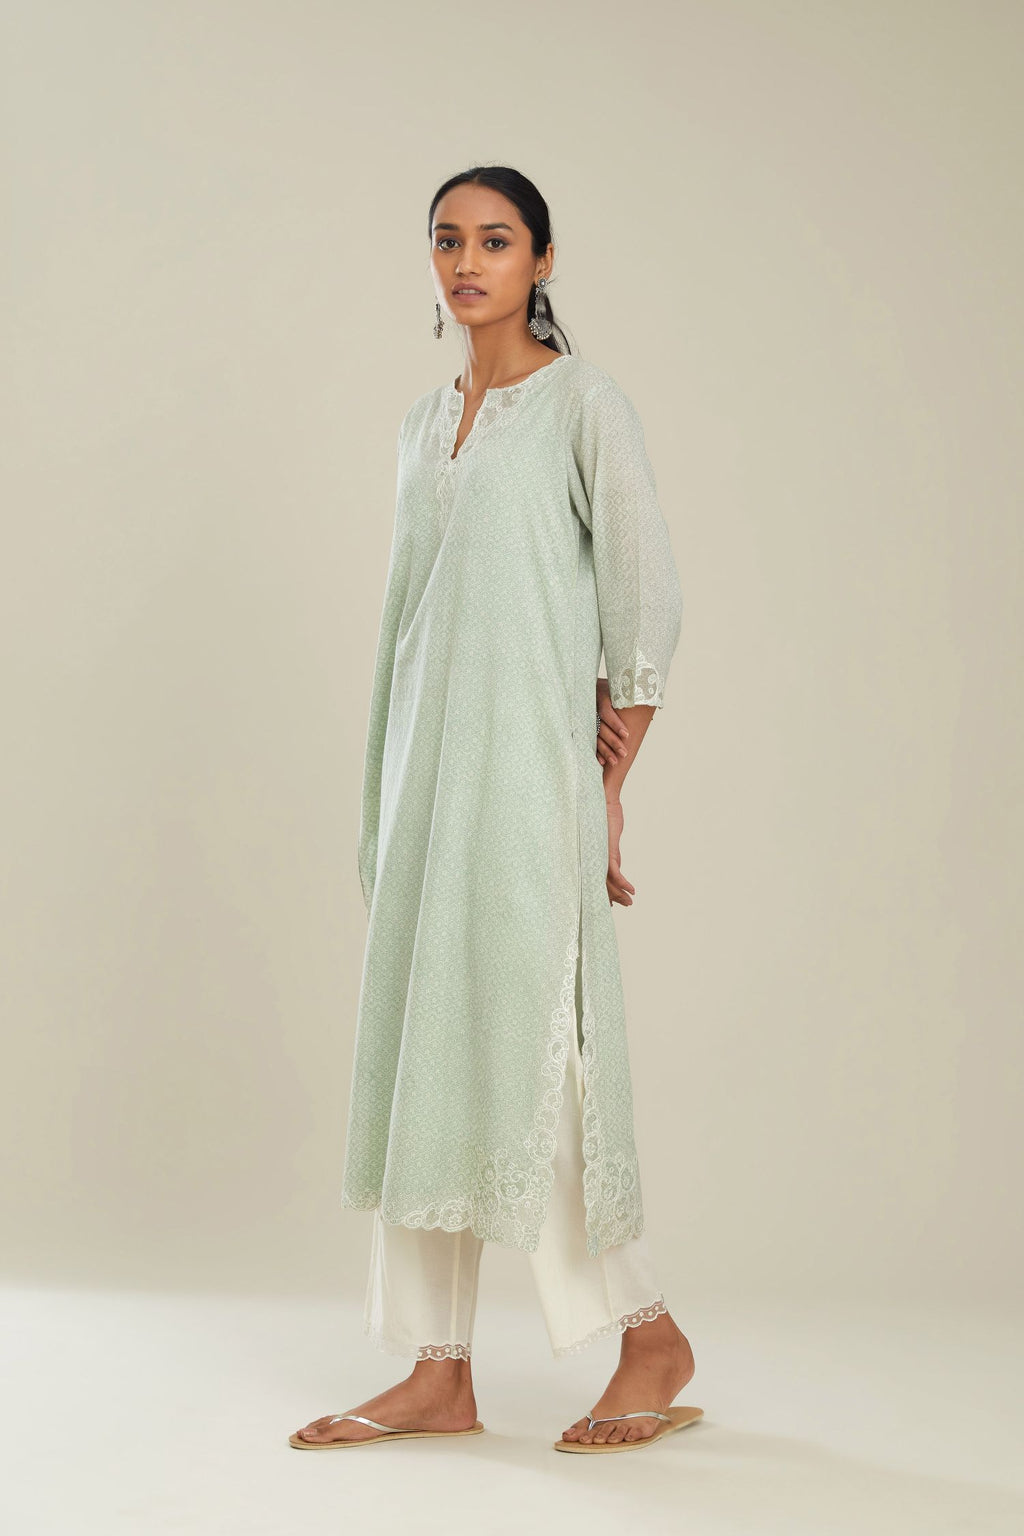 Green hand block over-printed cotton straight kurta set with embroidered cotton chanderi cutwork side panels, highlighted with sequins